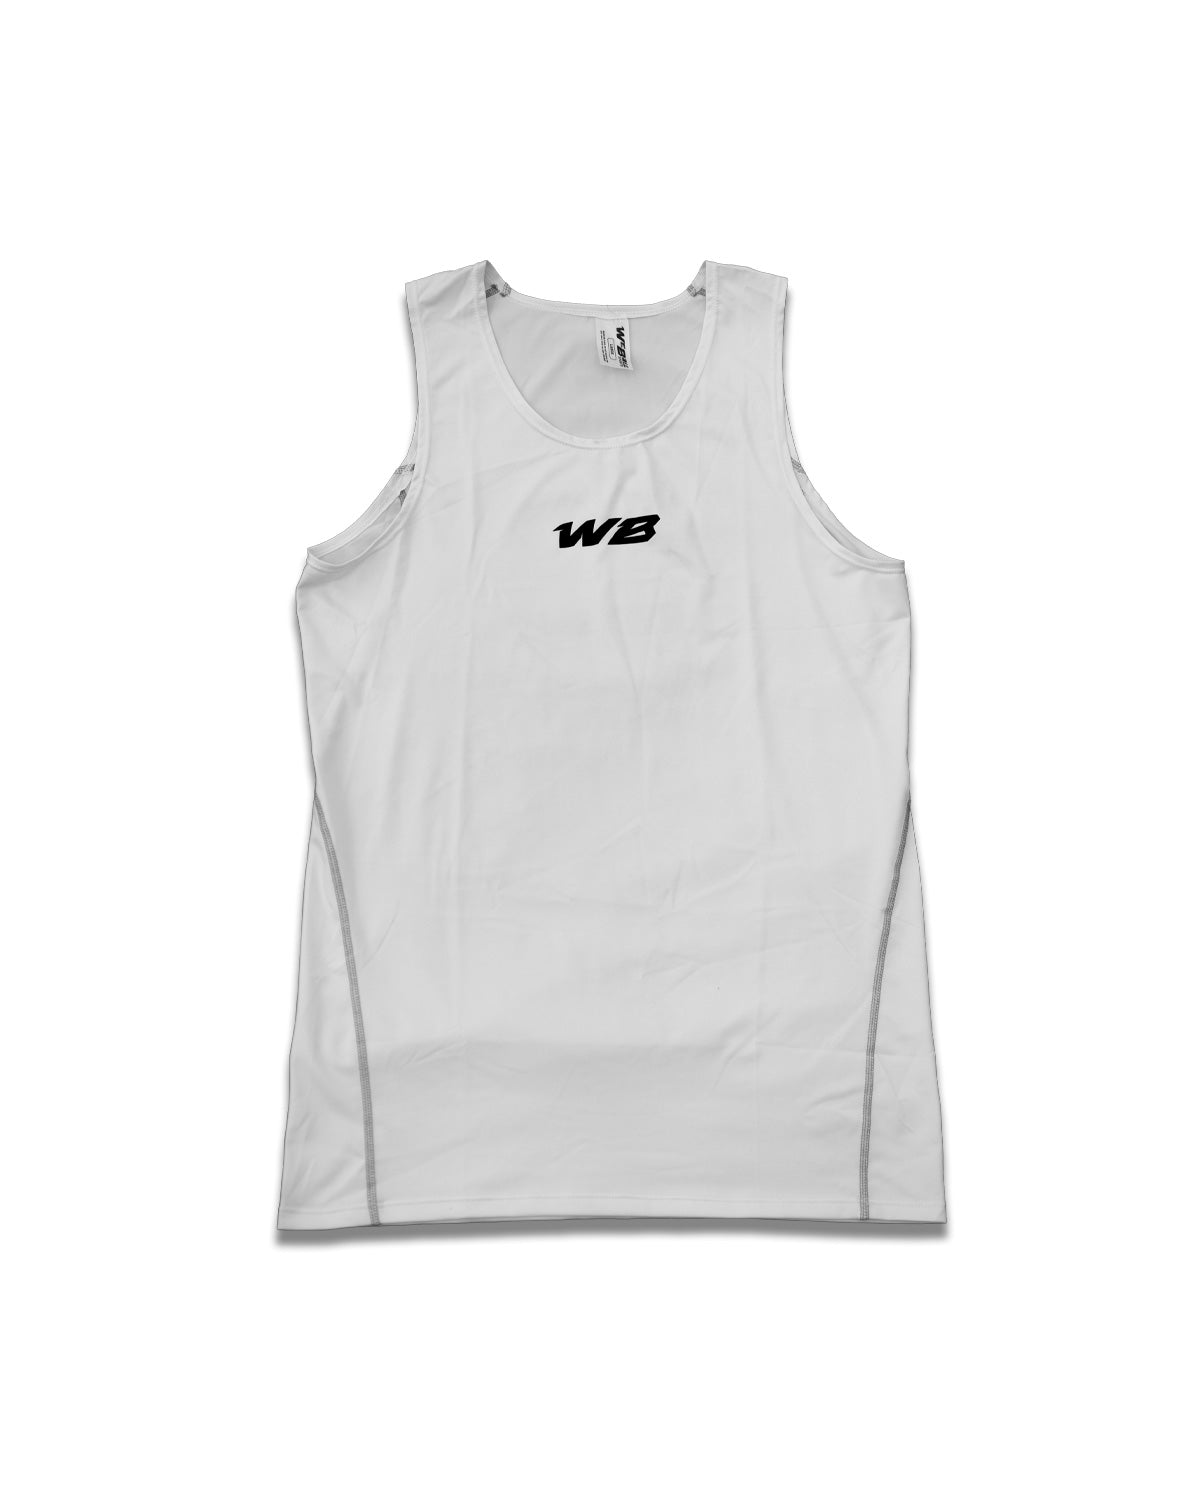 COMPRESSION TANK TOP [WHITE] - We Ball Sports